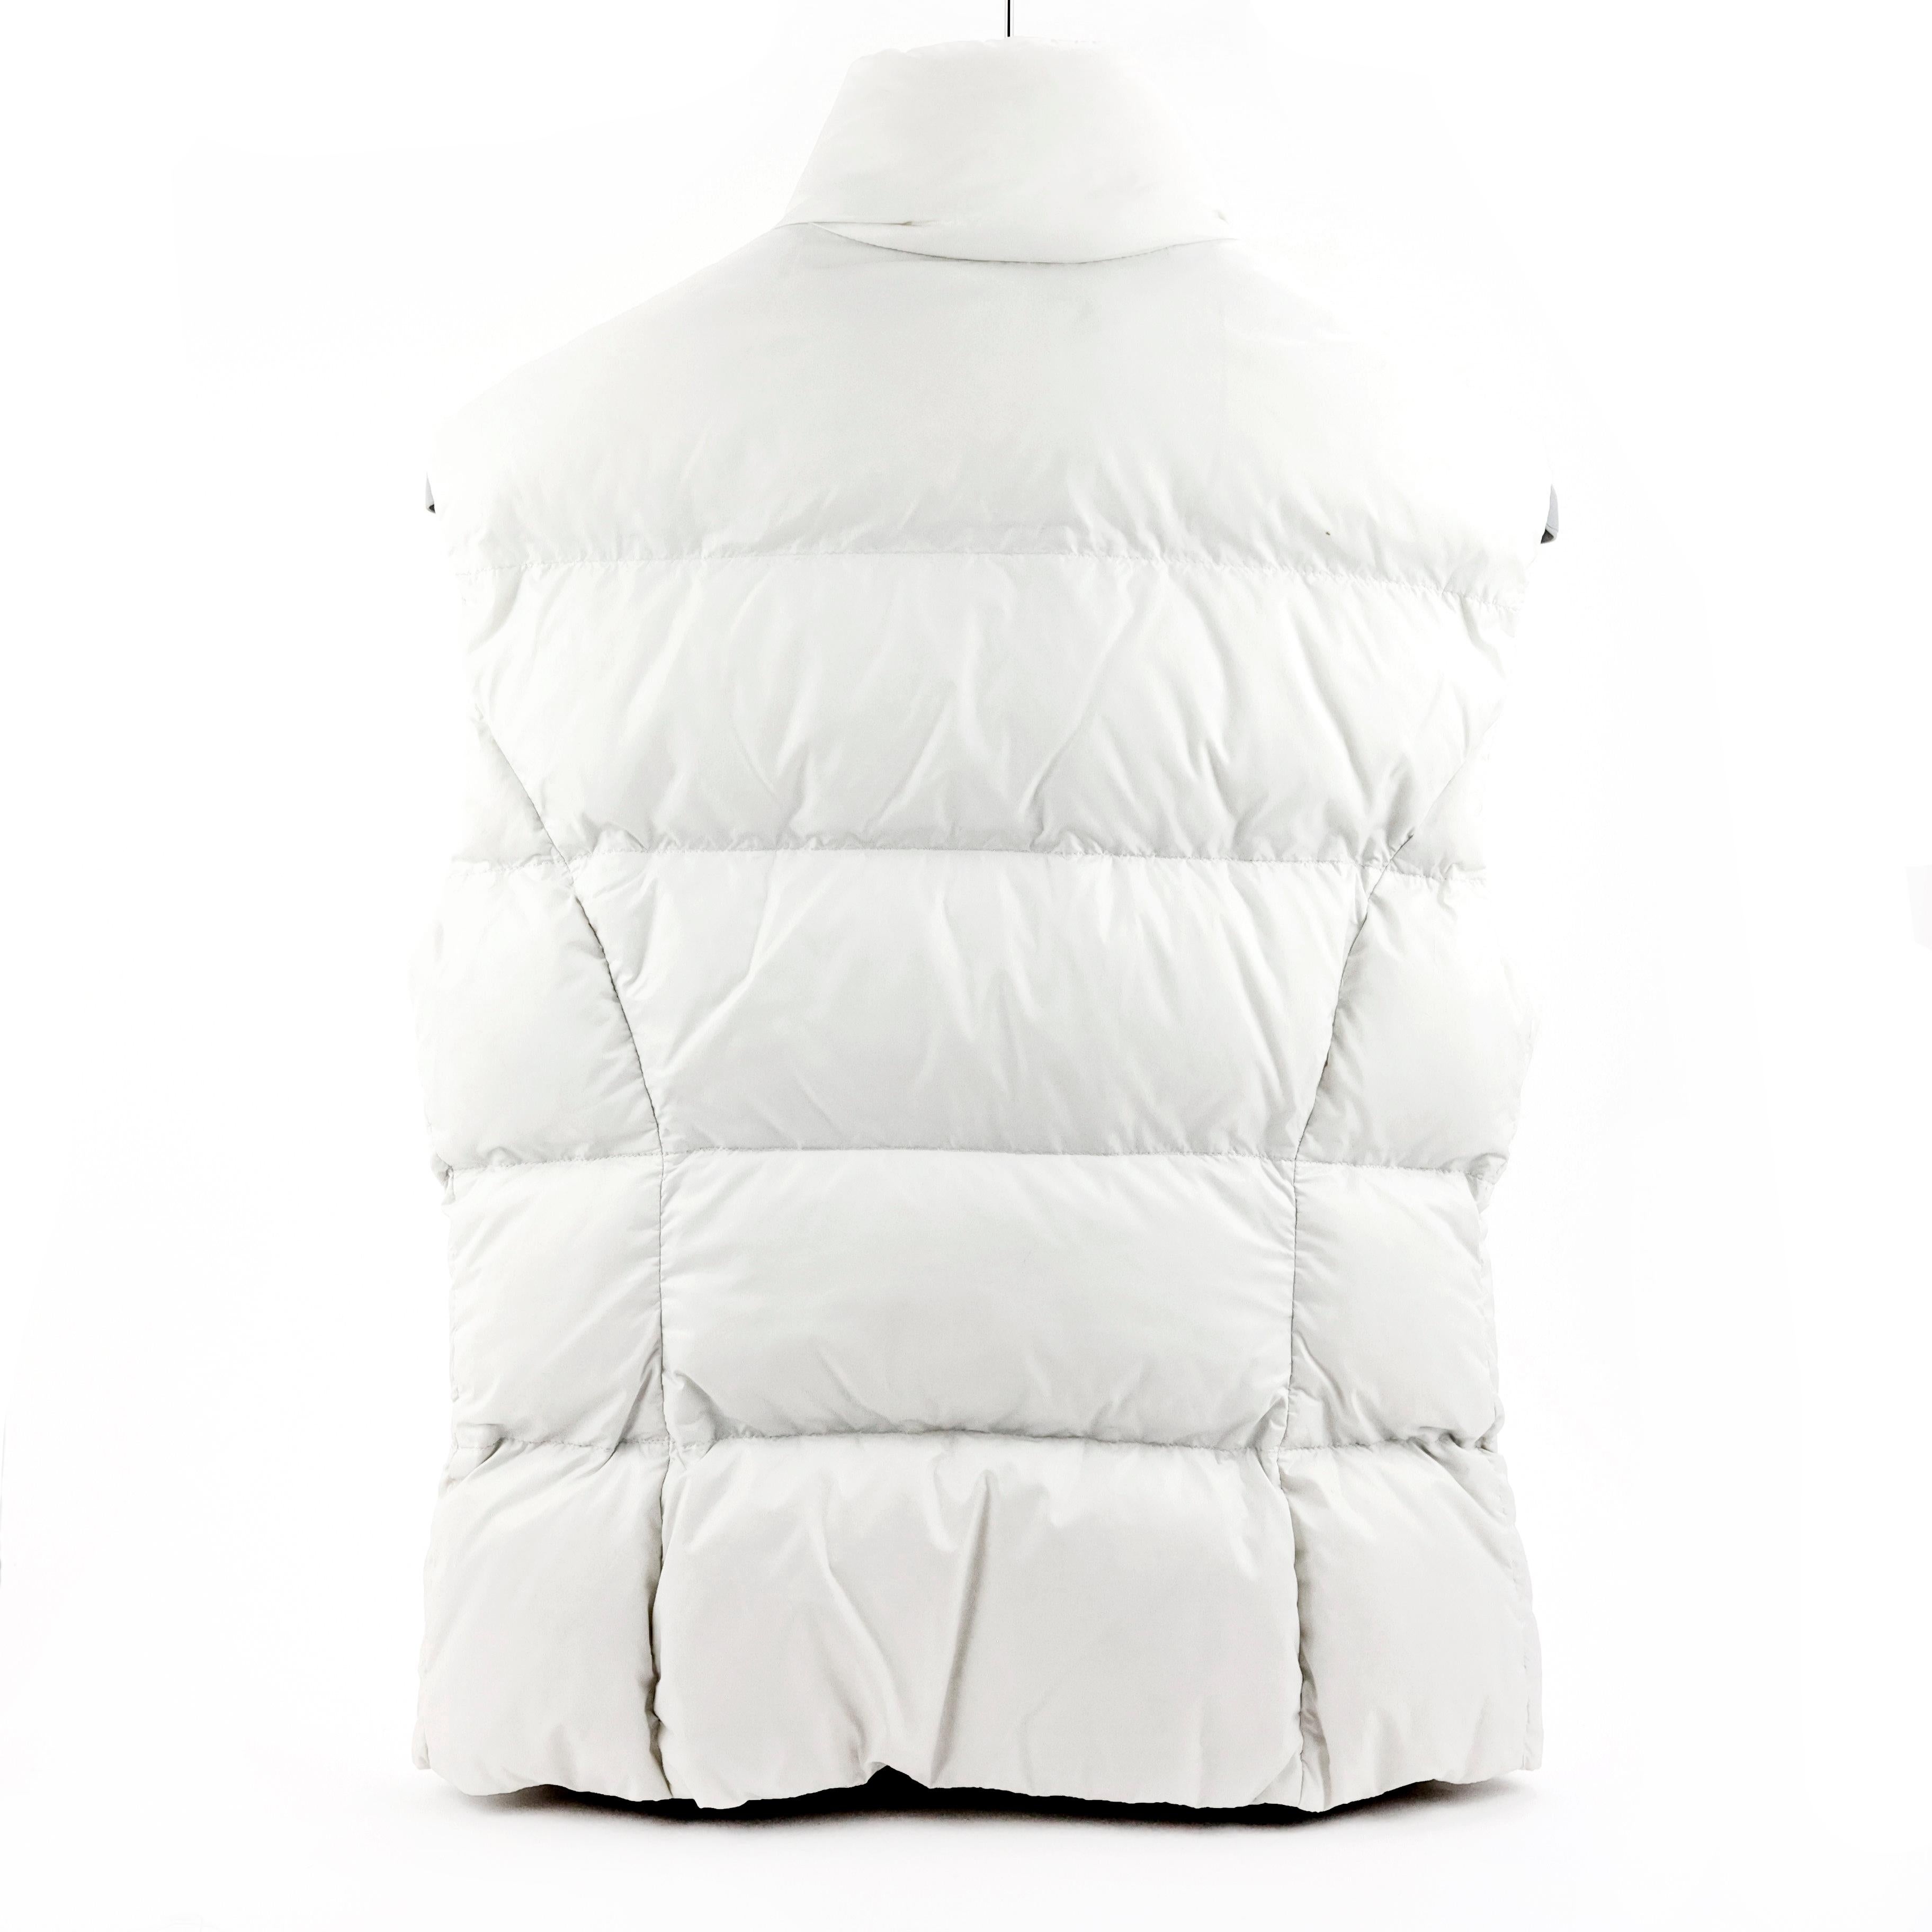 Prada sleeveless puffer jacket in nylon color white, size 42 IT. 

Condition:
Really good.

Packing/accessories:
Hanger.